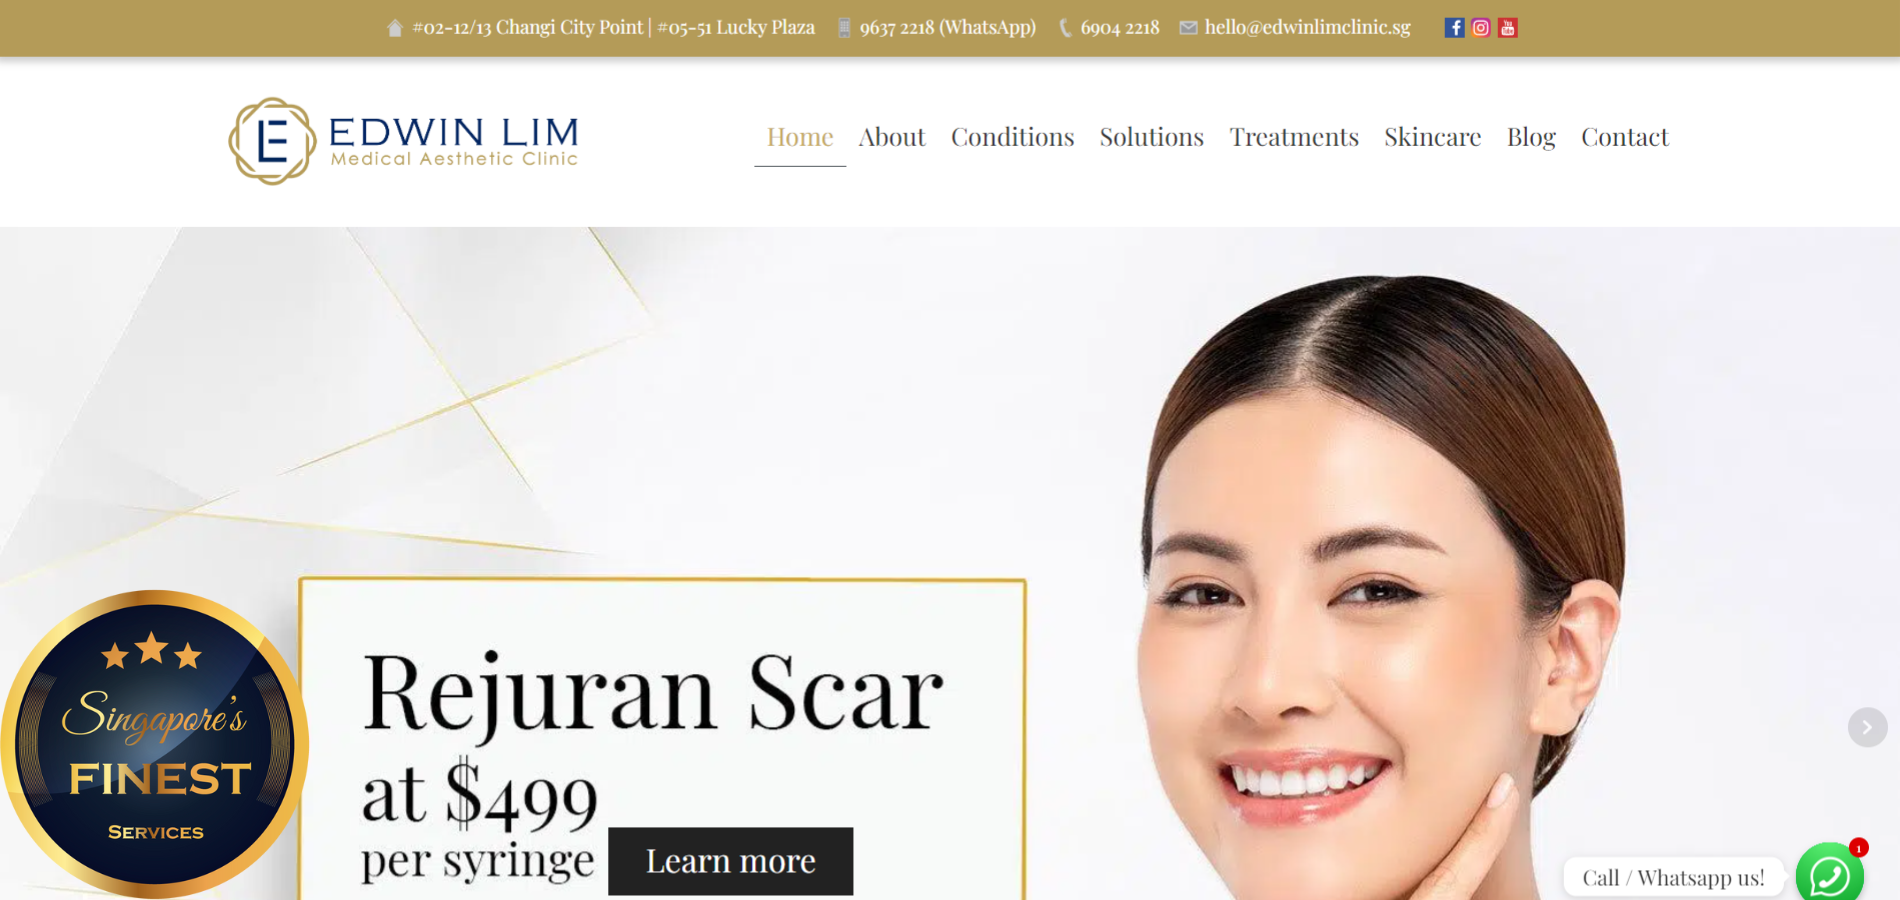 The Finest Clinics for Eye Bag Removal in Singapore